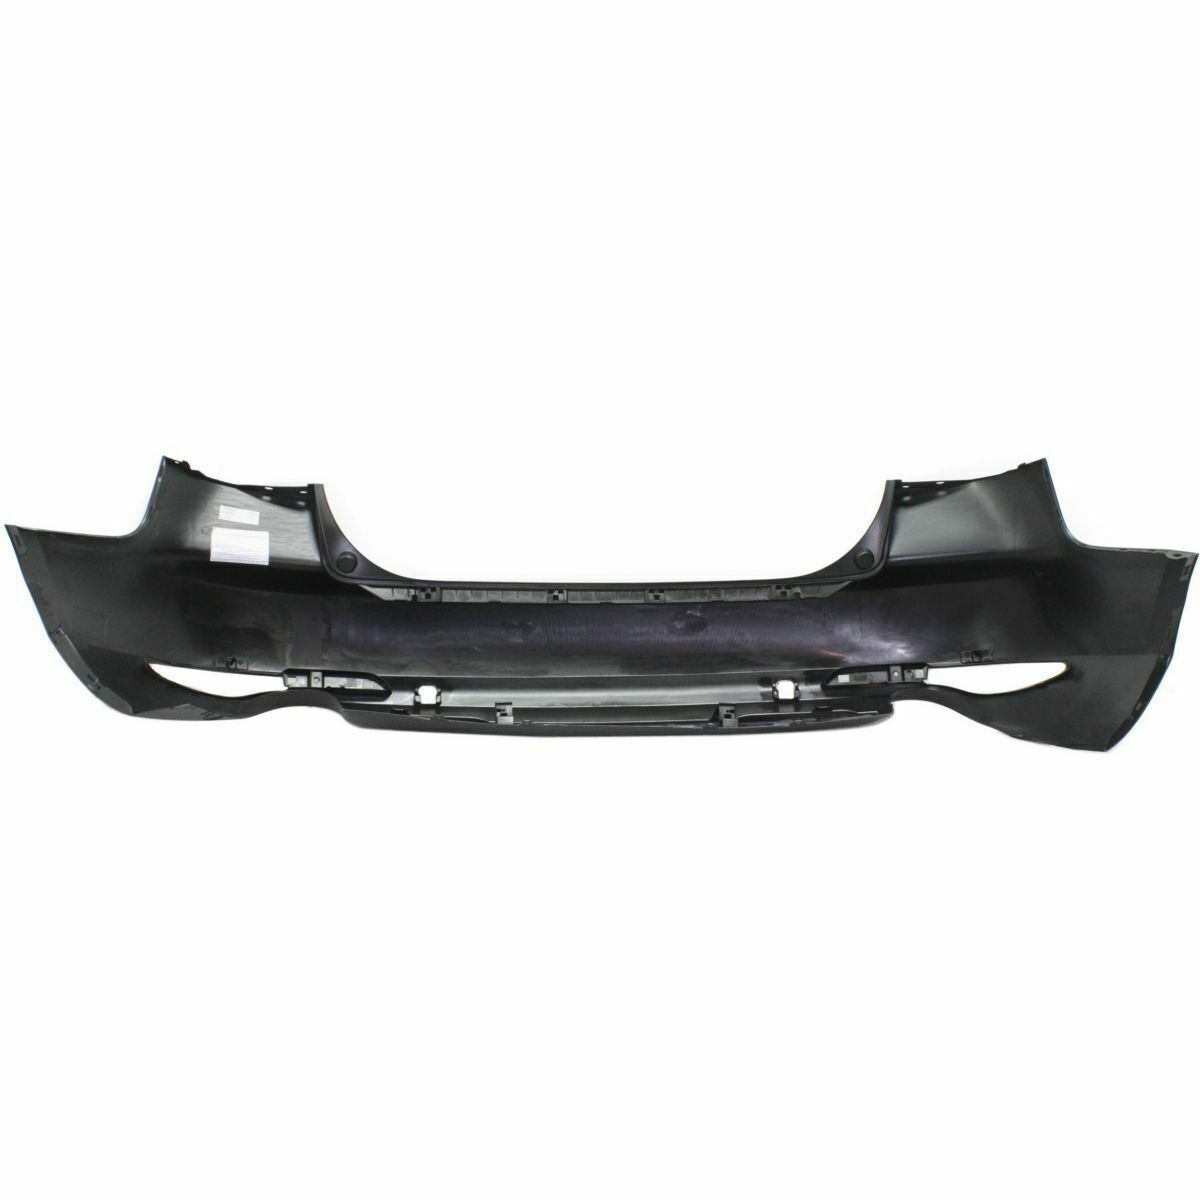 2010-2012 MAZDA CX-7; Rear Bumper Cover; Painted to Match